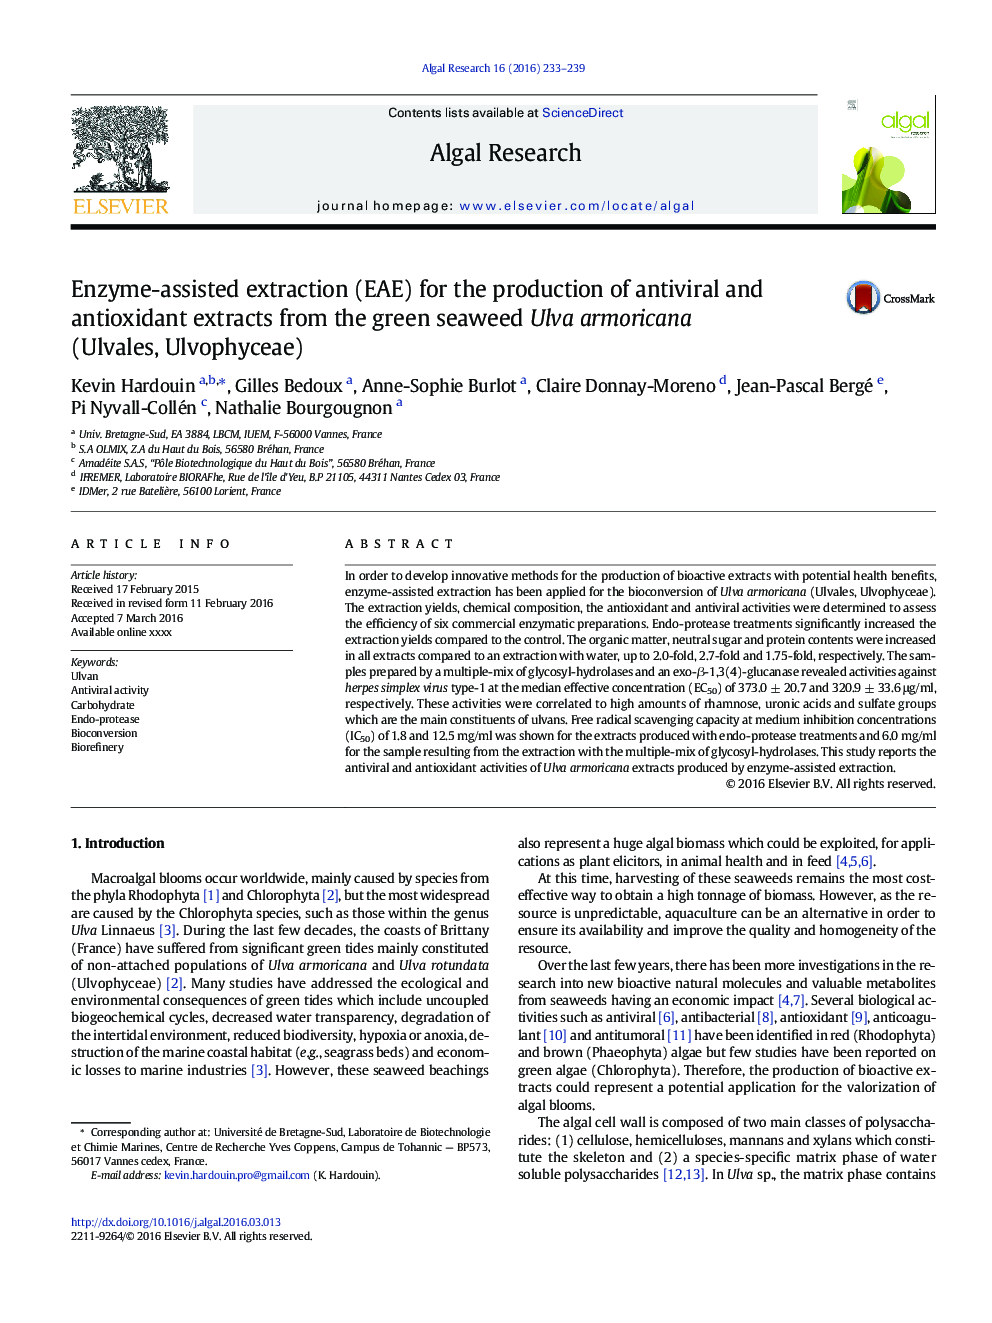 Enzyme-assisted extraction (EAE) for the production of antiviral and antioxidant extracts from the green seaweed Ulva armoricana (Ulvales, Ulvophyceae)